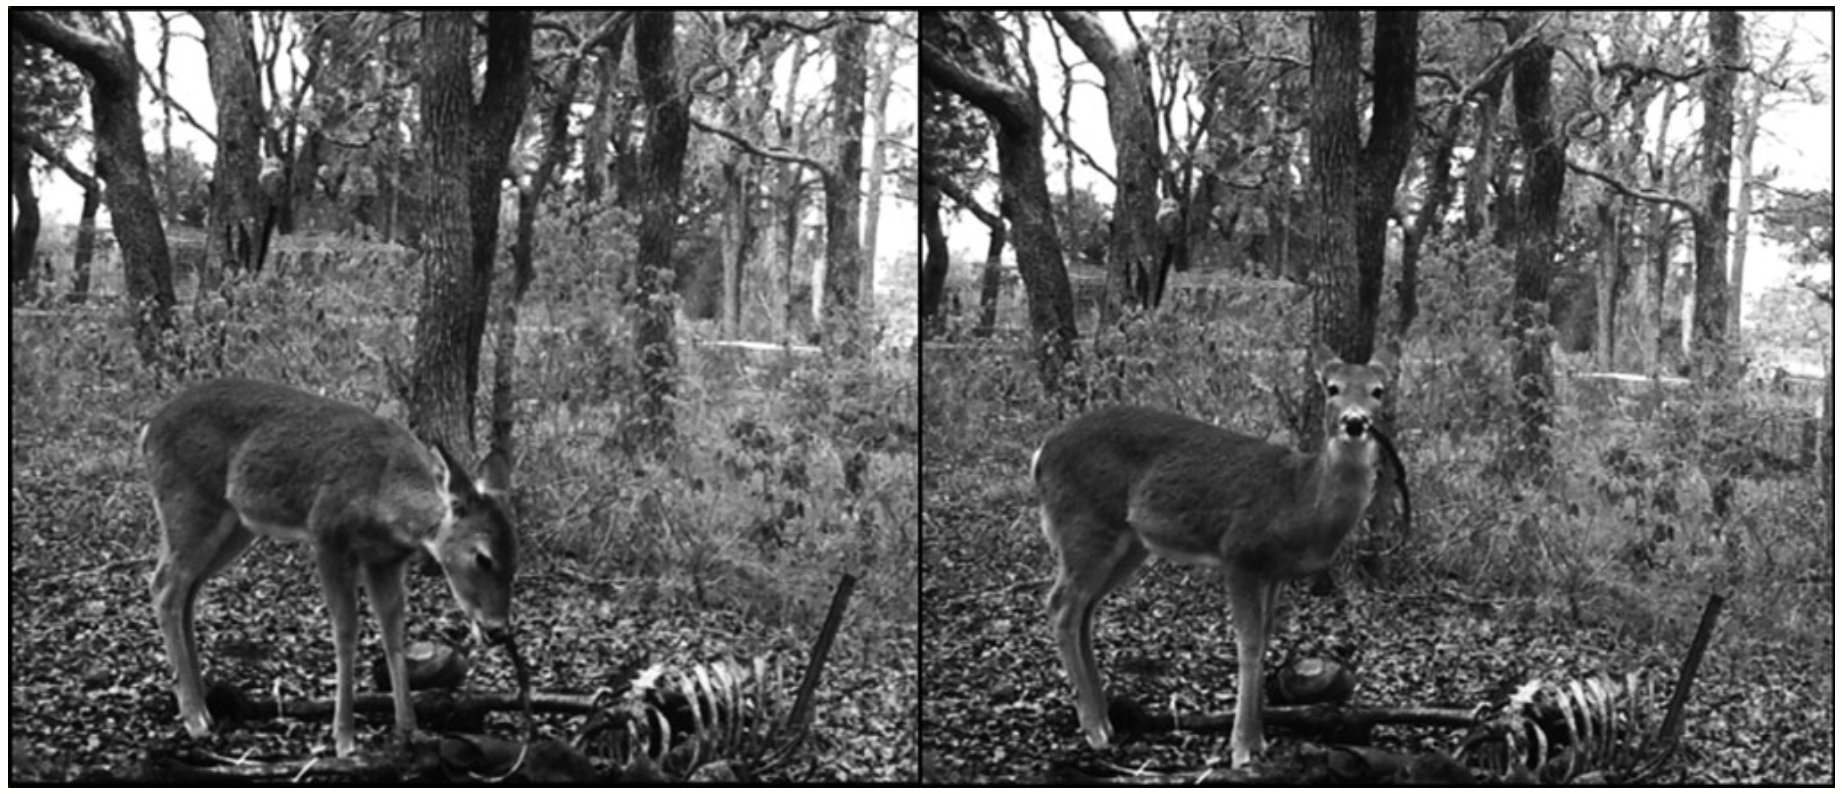 A Deer Was Caught Gnawing On Human Remains And The End Is Nigh